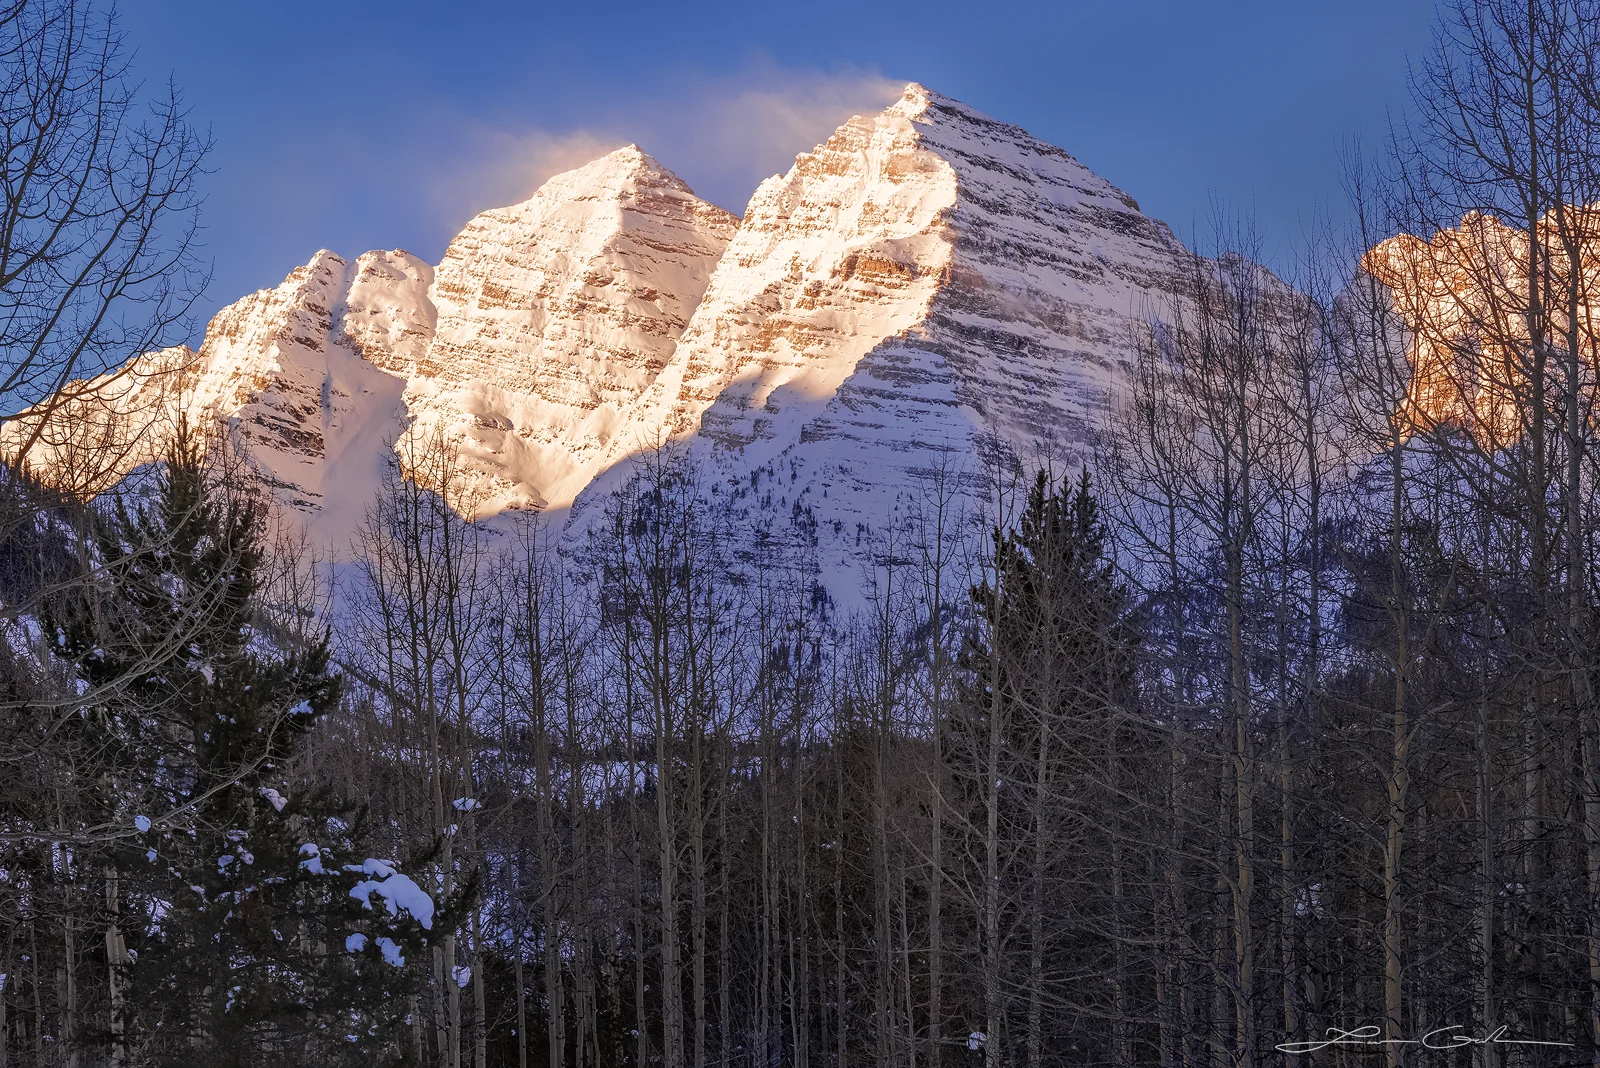 Stunning winter morning view of the Maroon Bells mountains framed by aspen pine trees, with snow being blown off the peaks against a clear blue sky. - Gintchin Fine Art